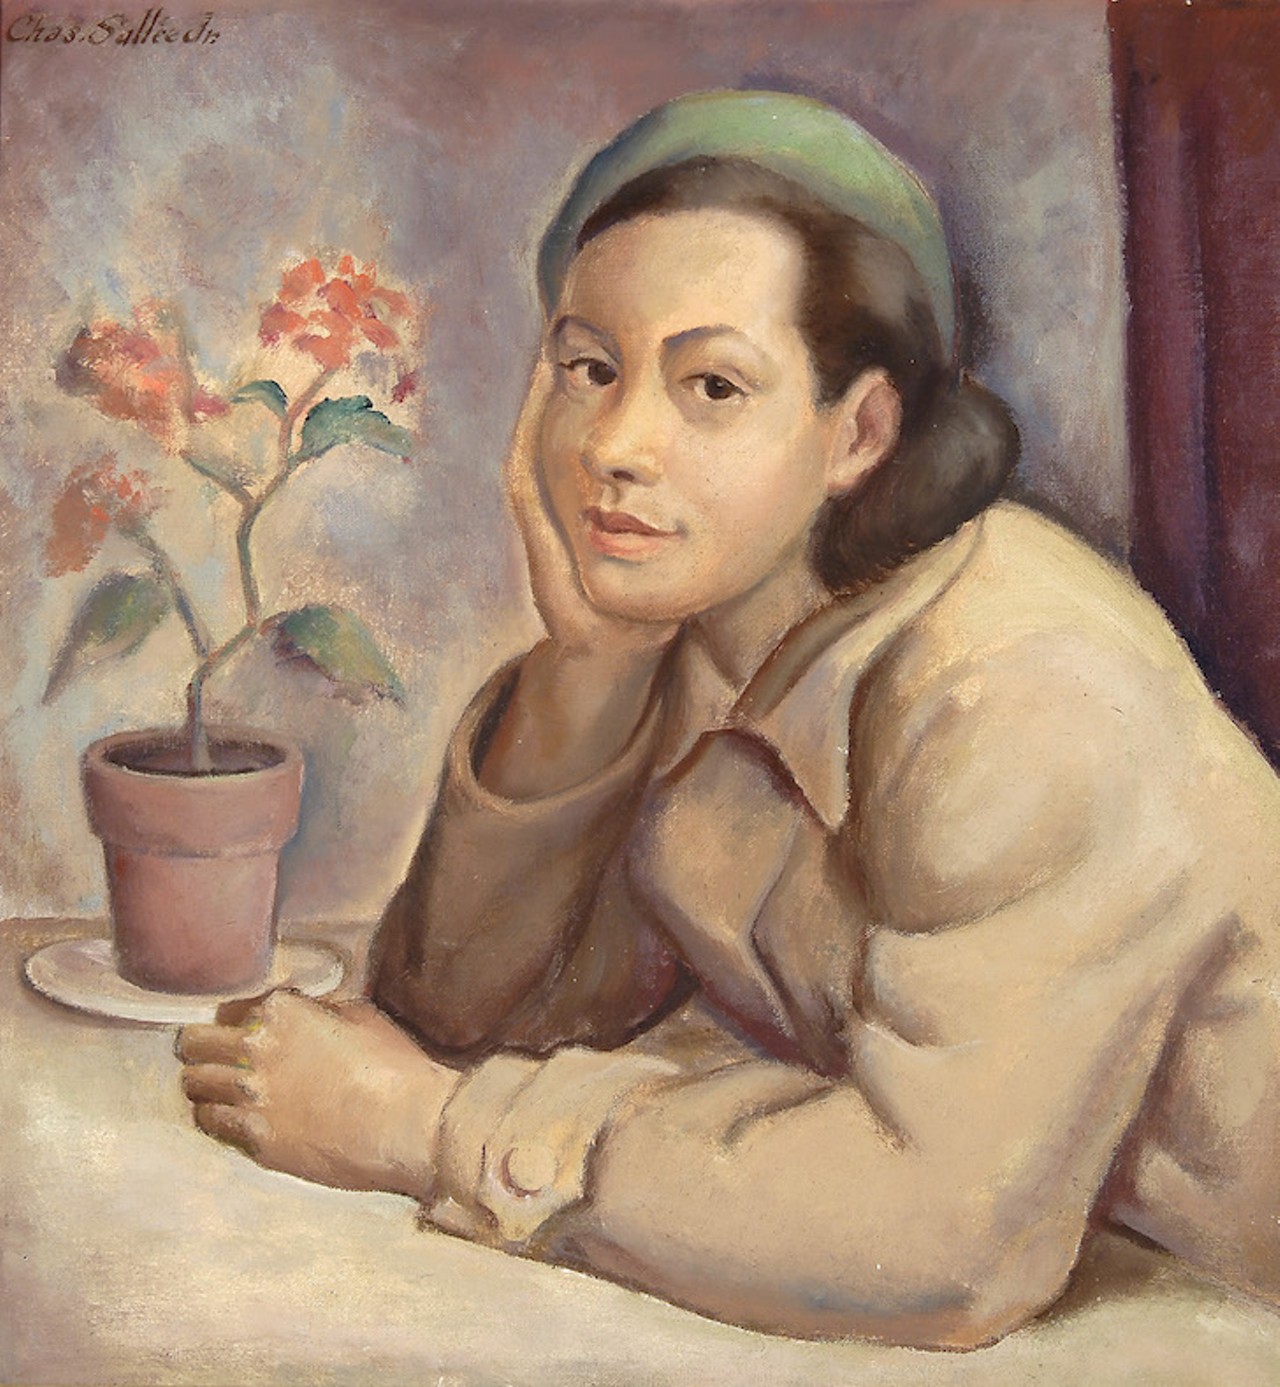 Charles Louis Sallee, Jr., Girl with Pink Geranium, 1936. Oil on canvas.